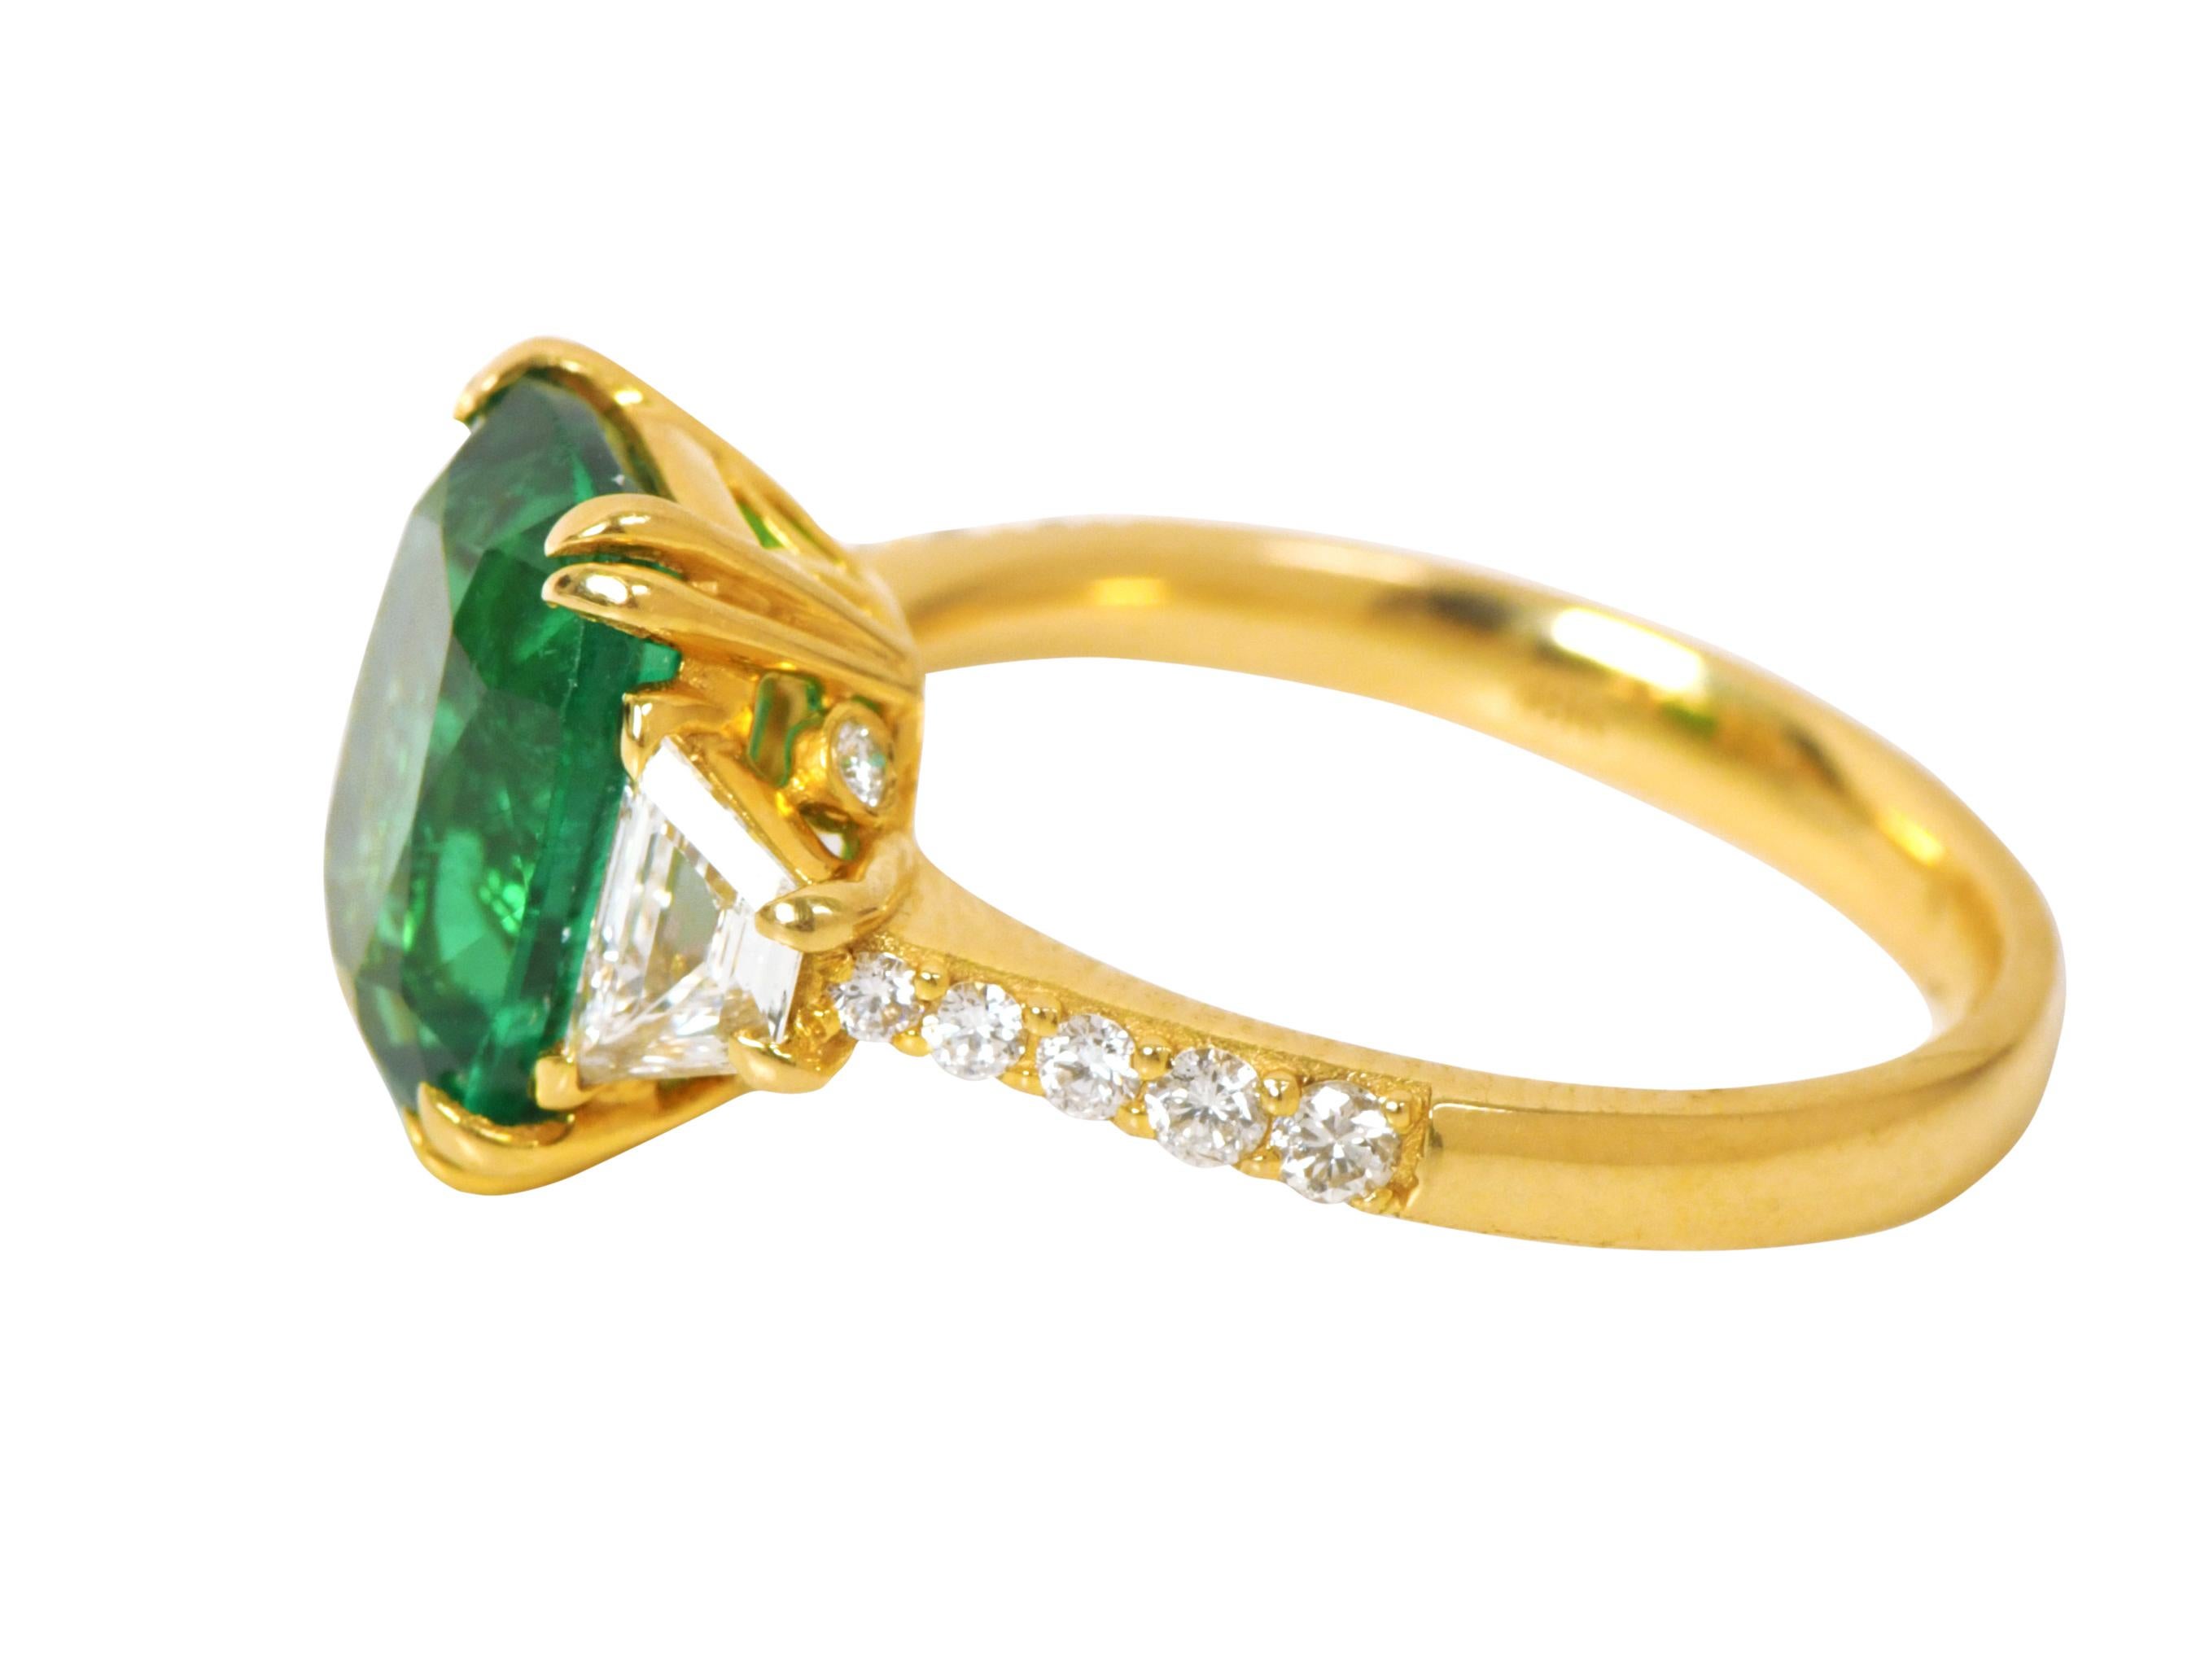 Women's 18 Karat Yellow Gold 5.06 Carat Natural Emerald and Diamond Solitaire Ring For Sale